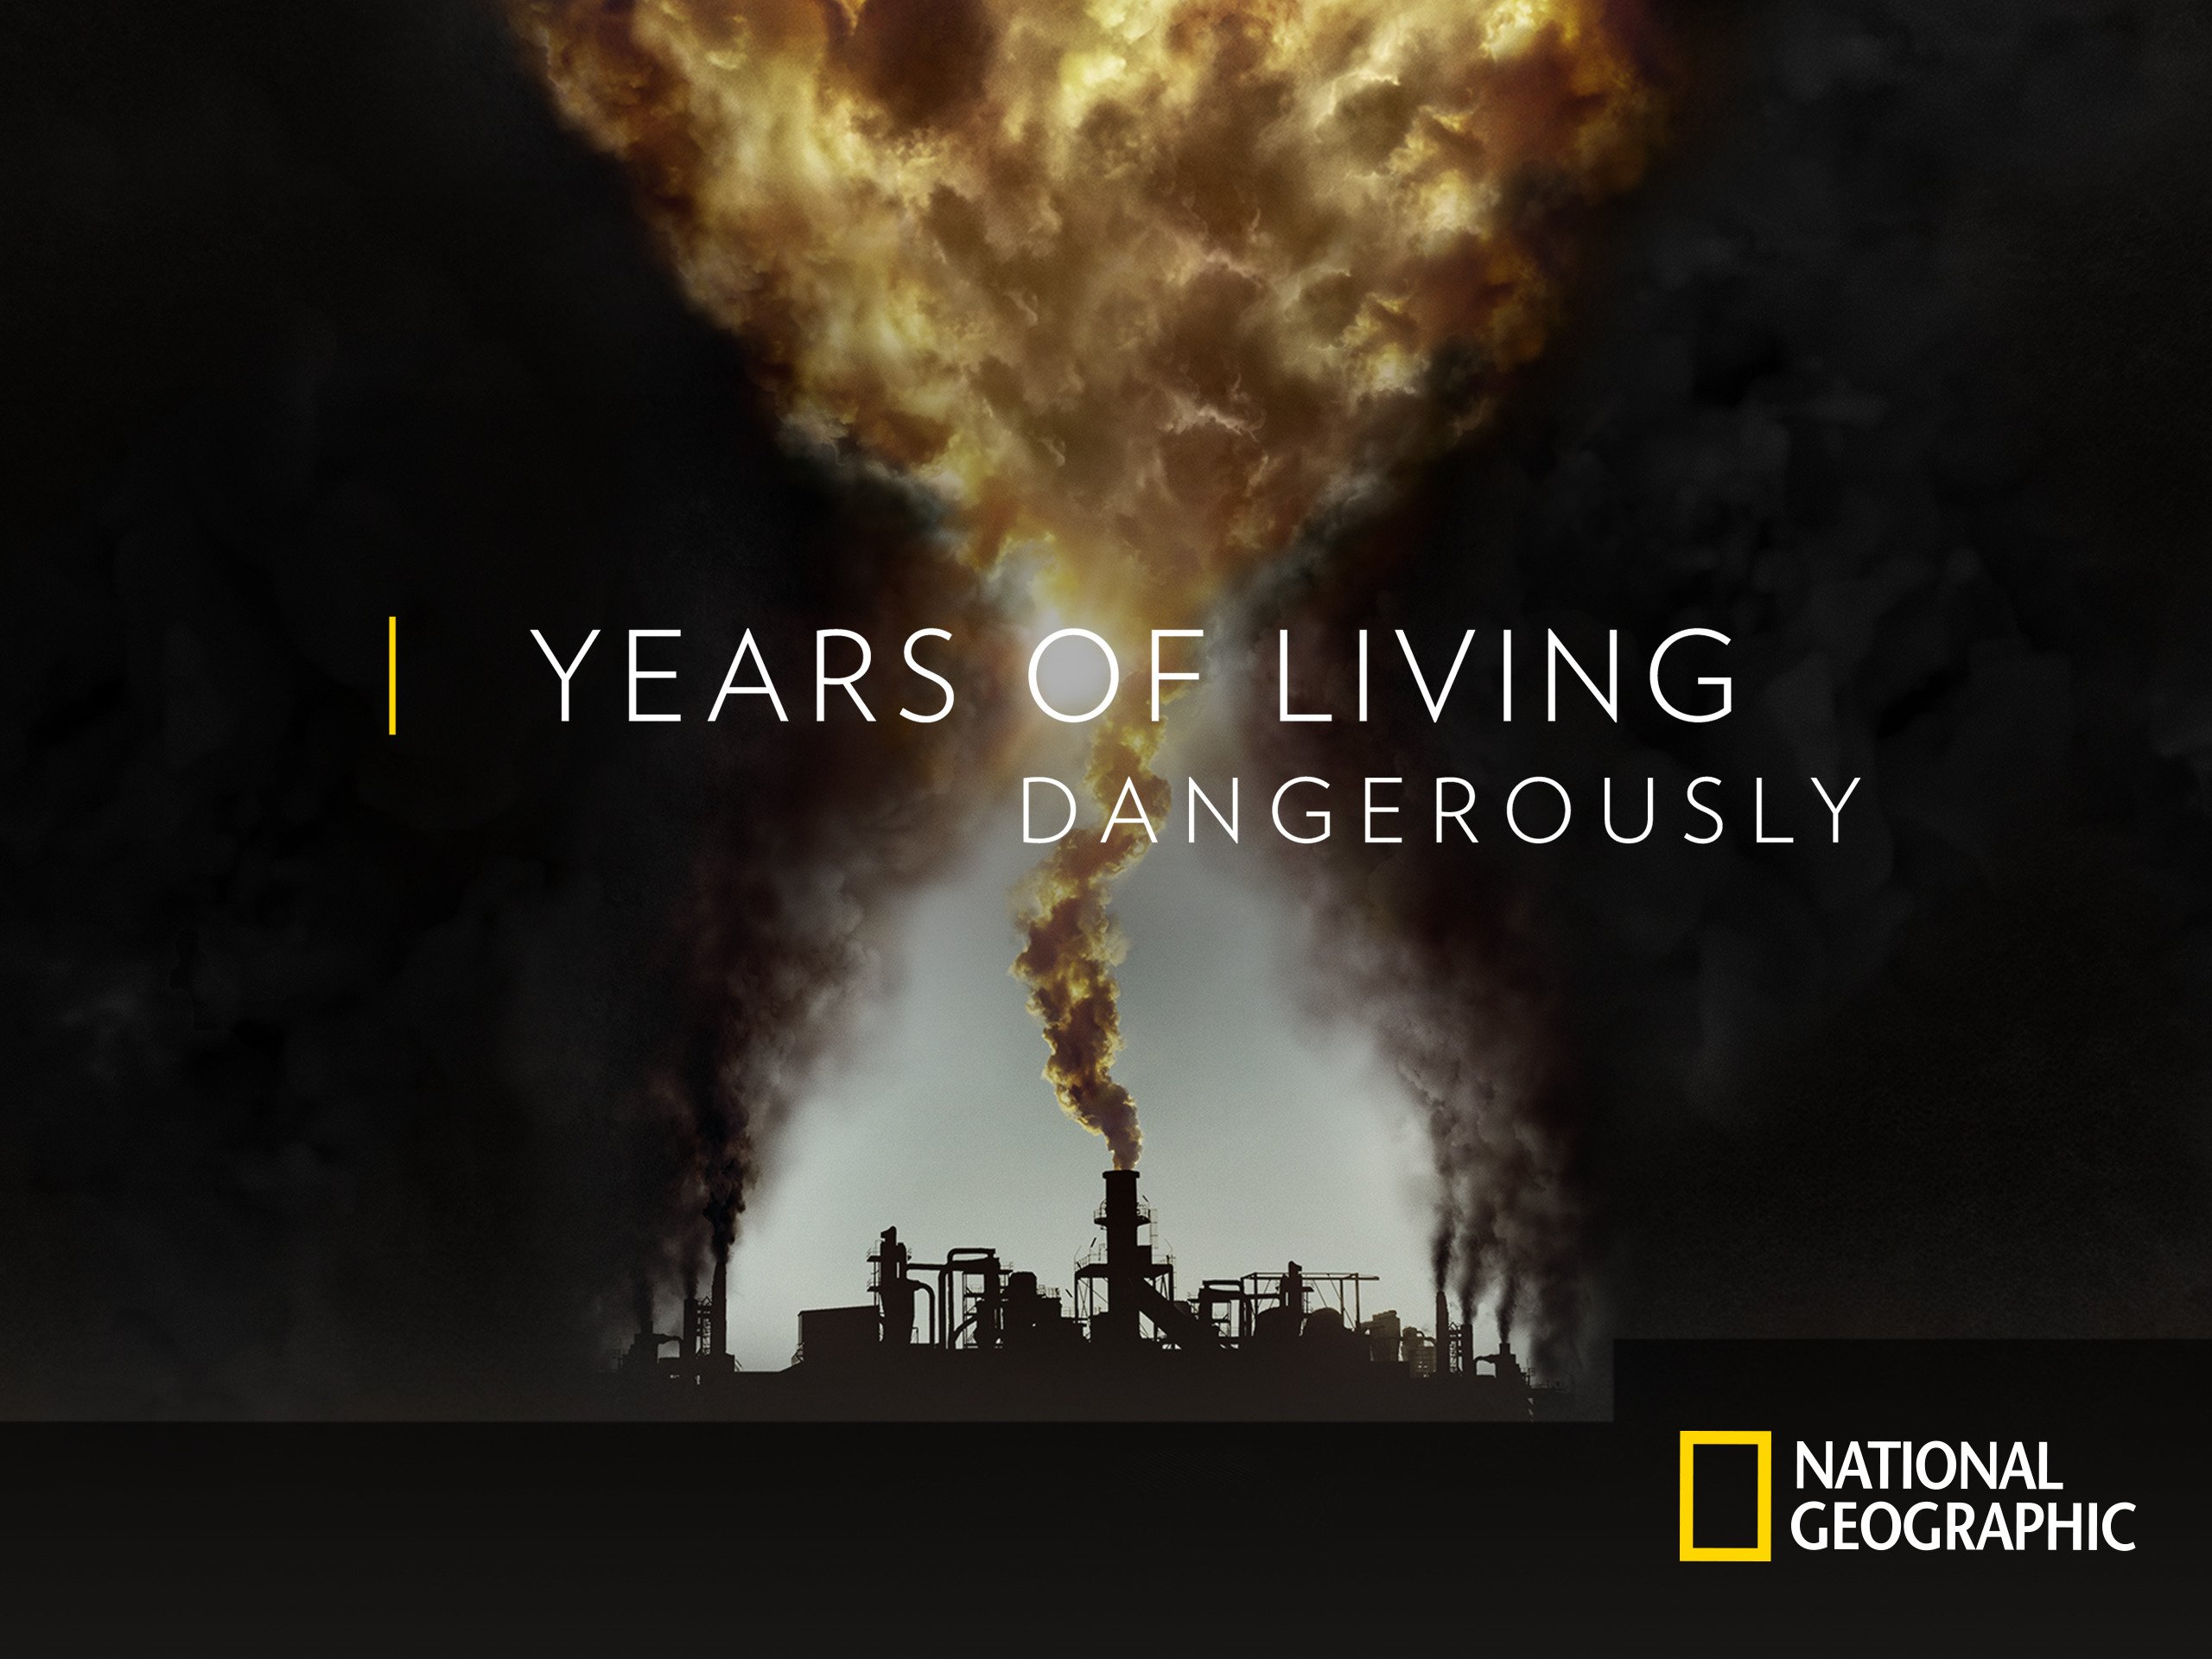 National Geographic's Years of Living Dangerously series